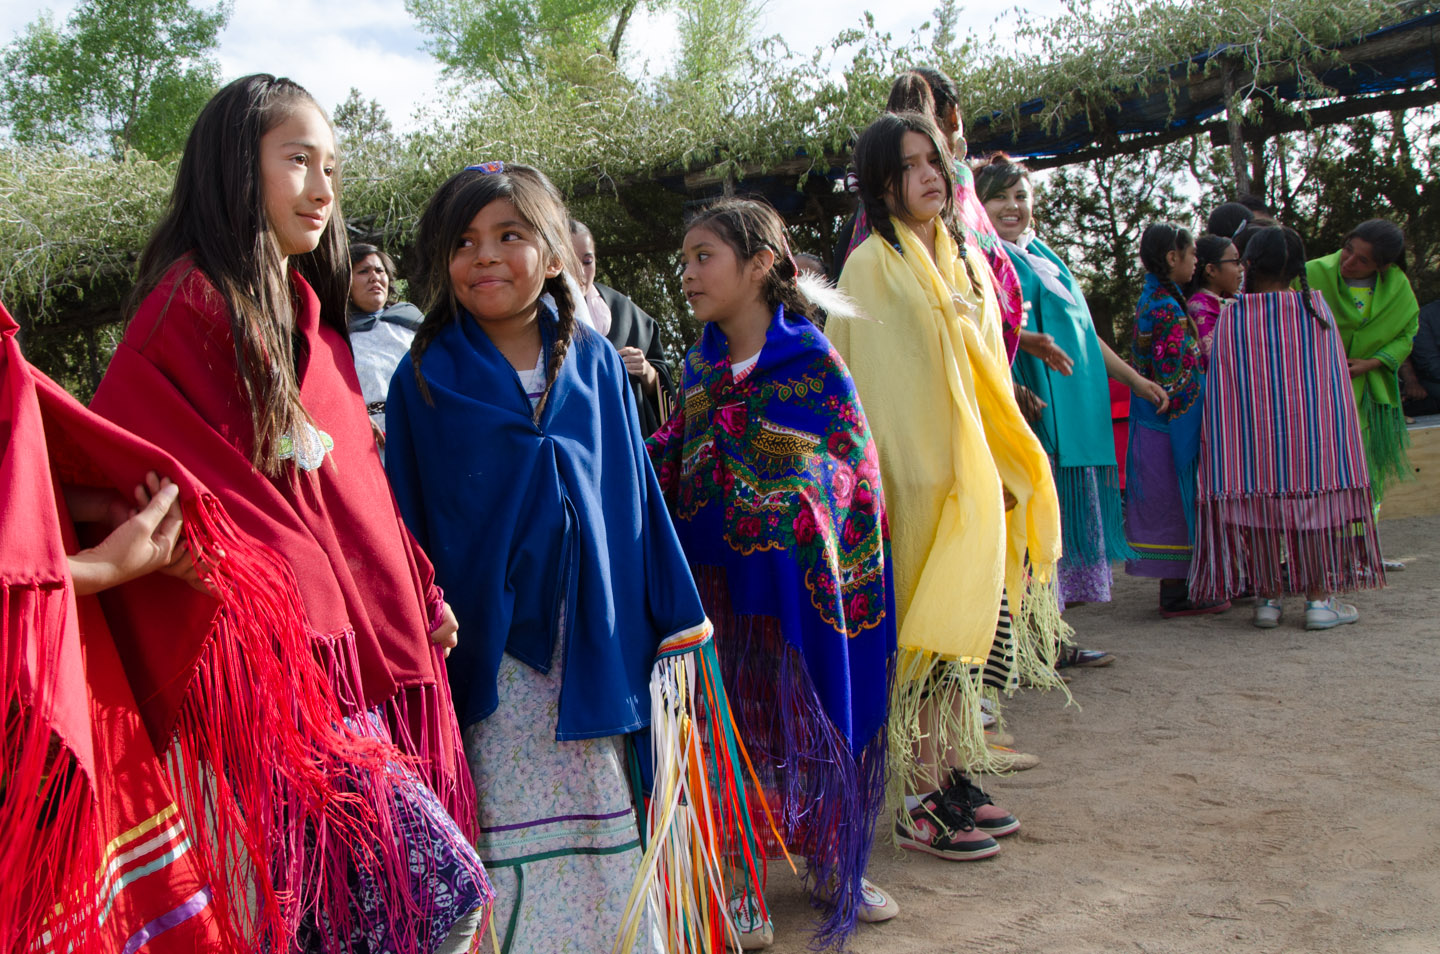 Girls, each wrapped in a colorful shawl, eagerly await the opportunity to pick out their dance partners in this women's choice dance.